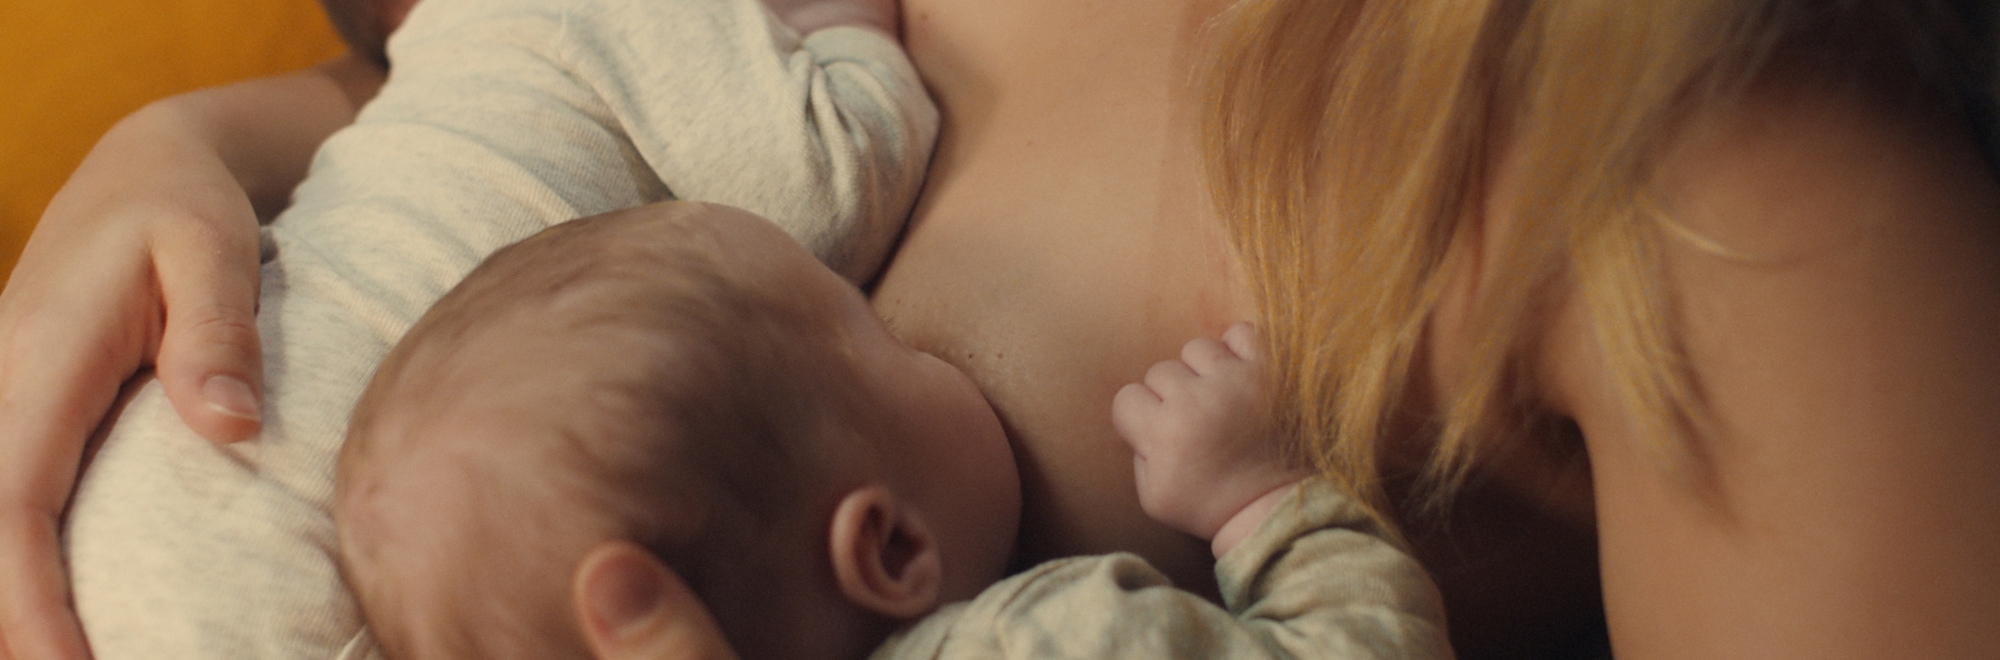 Tommee Tippee launches global campaign to empower mothers to feed the way that works for them